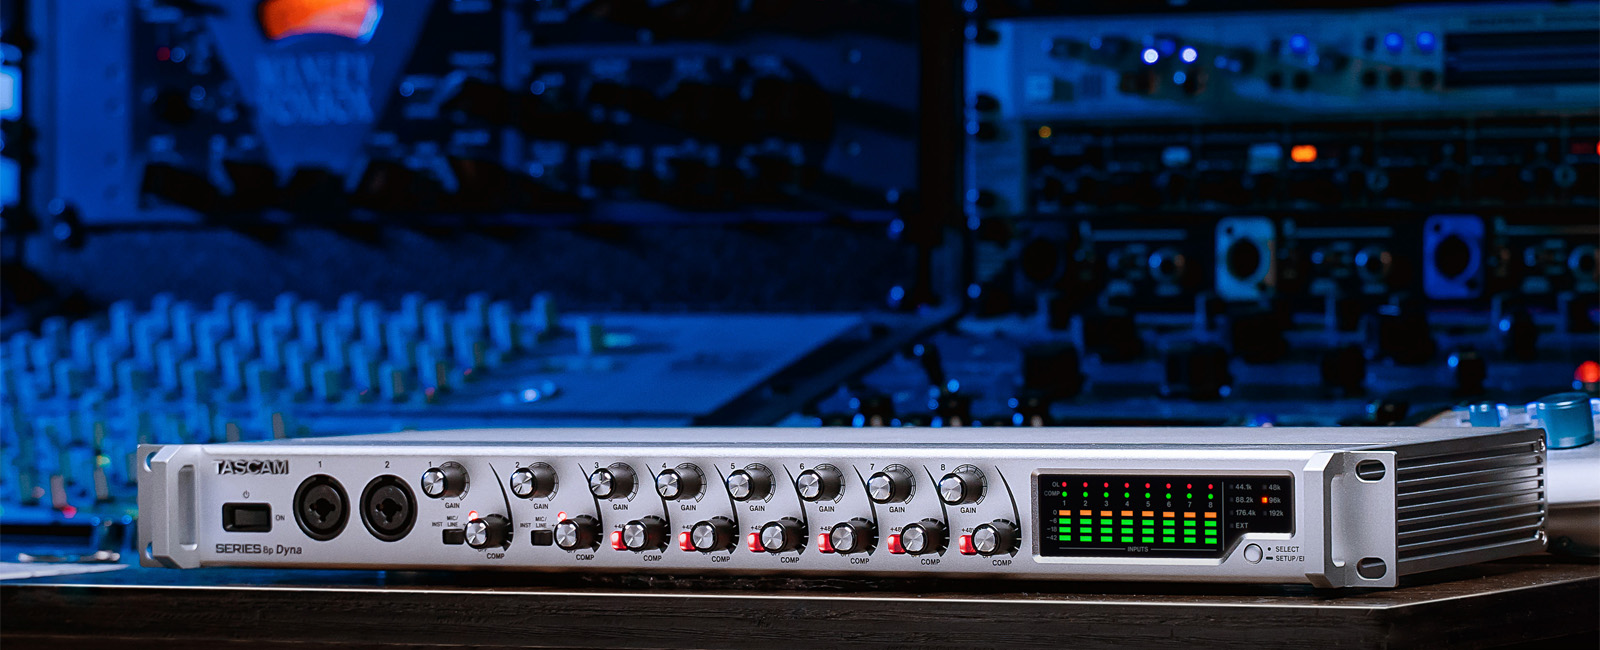 TASCAM Announces SERIES 8p Dyna 8-channel Microphone Preamp